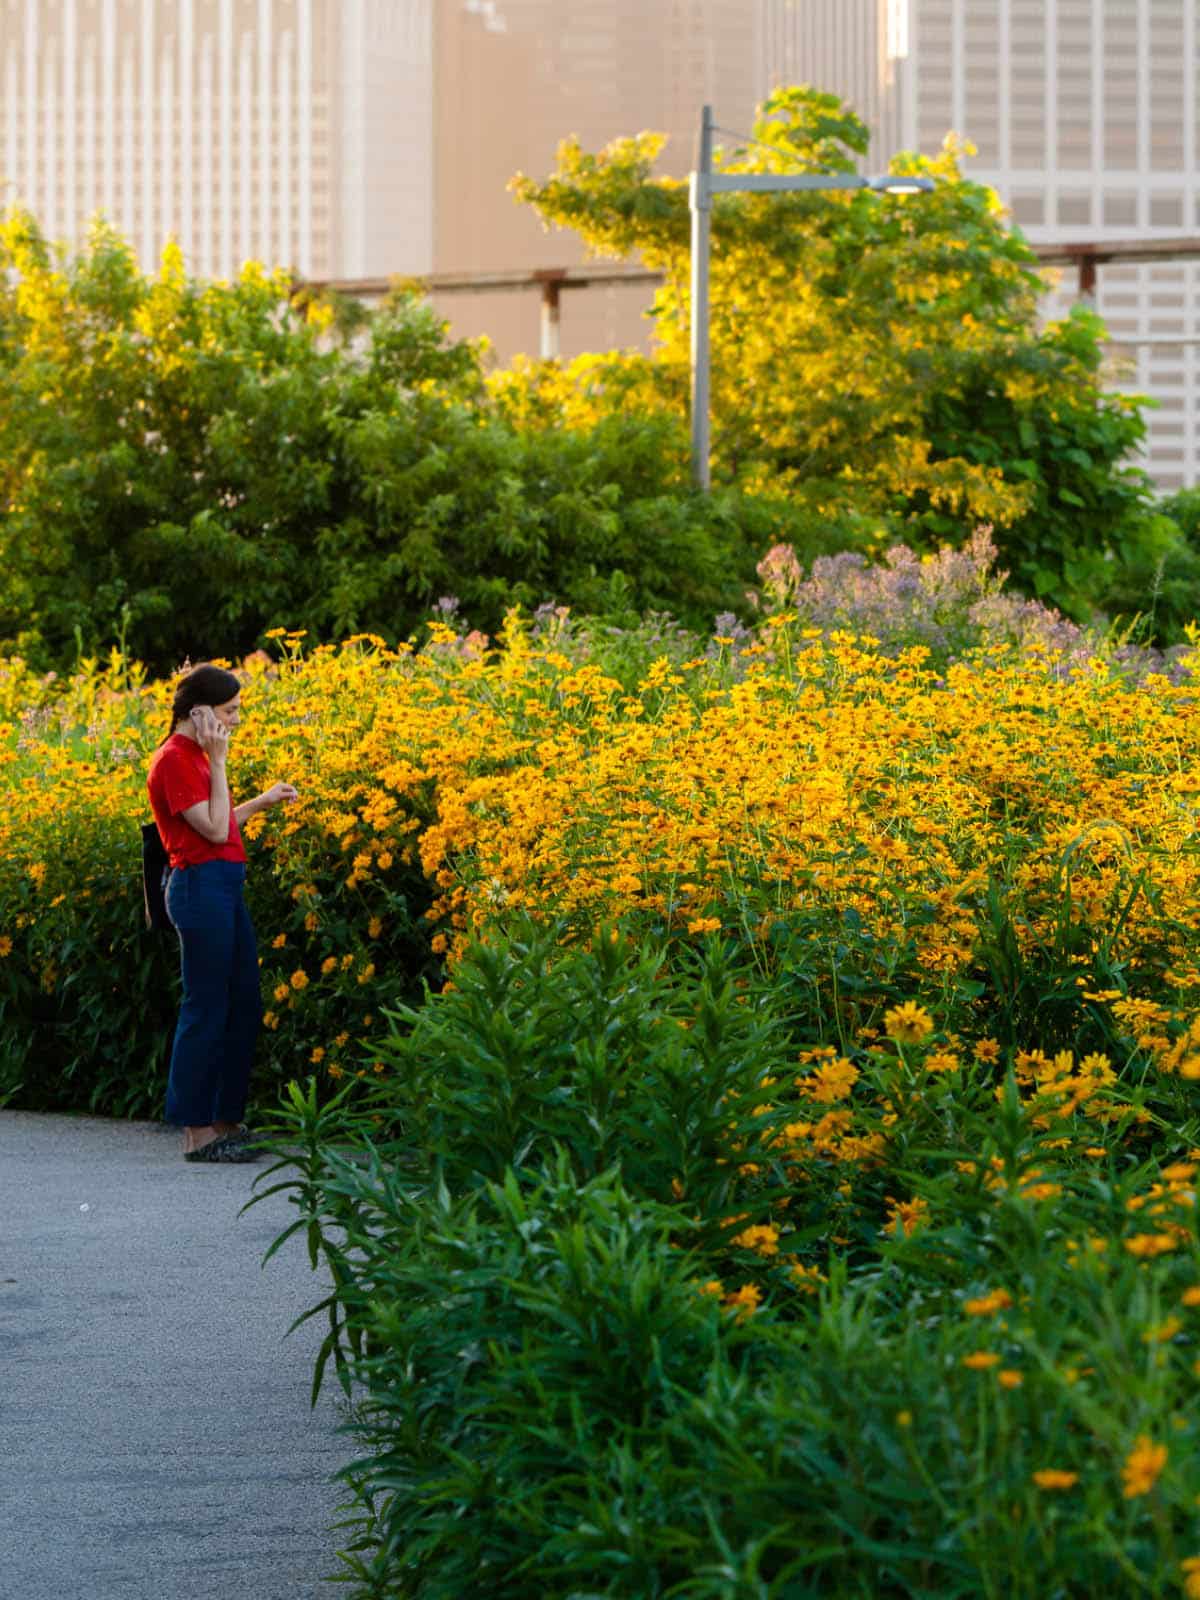 Woman on the phone standing next to bushes of yellow flowers at sunset.